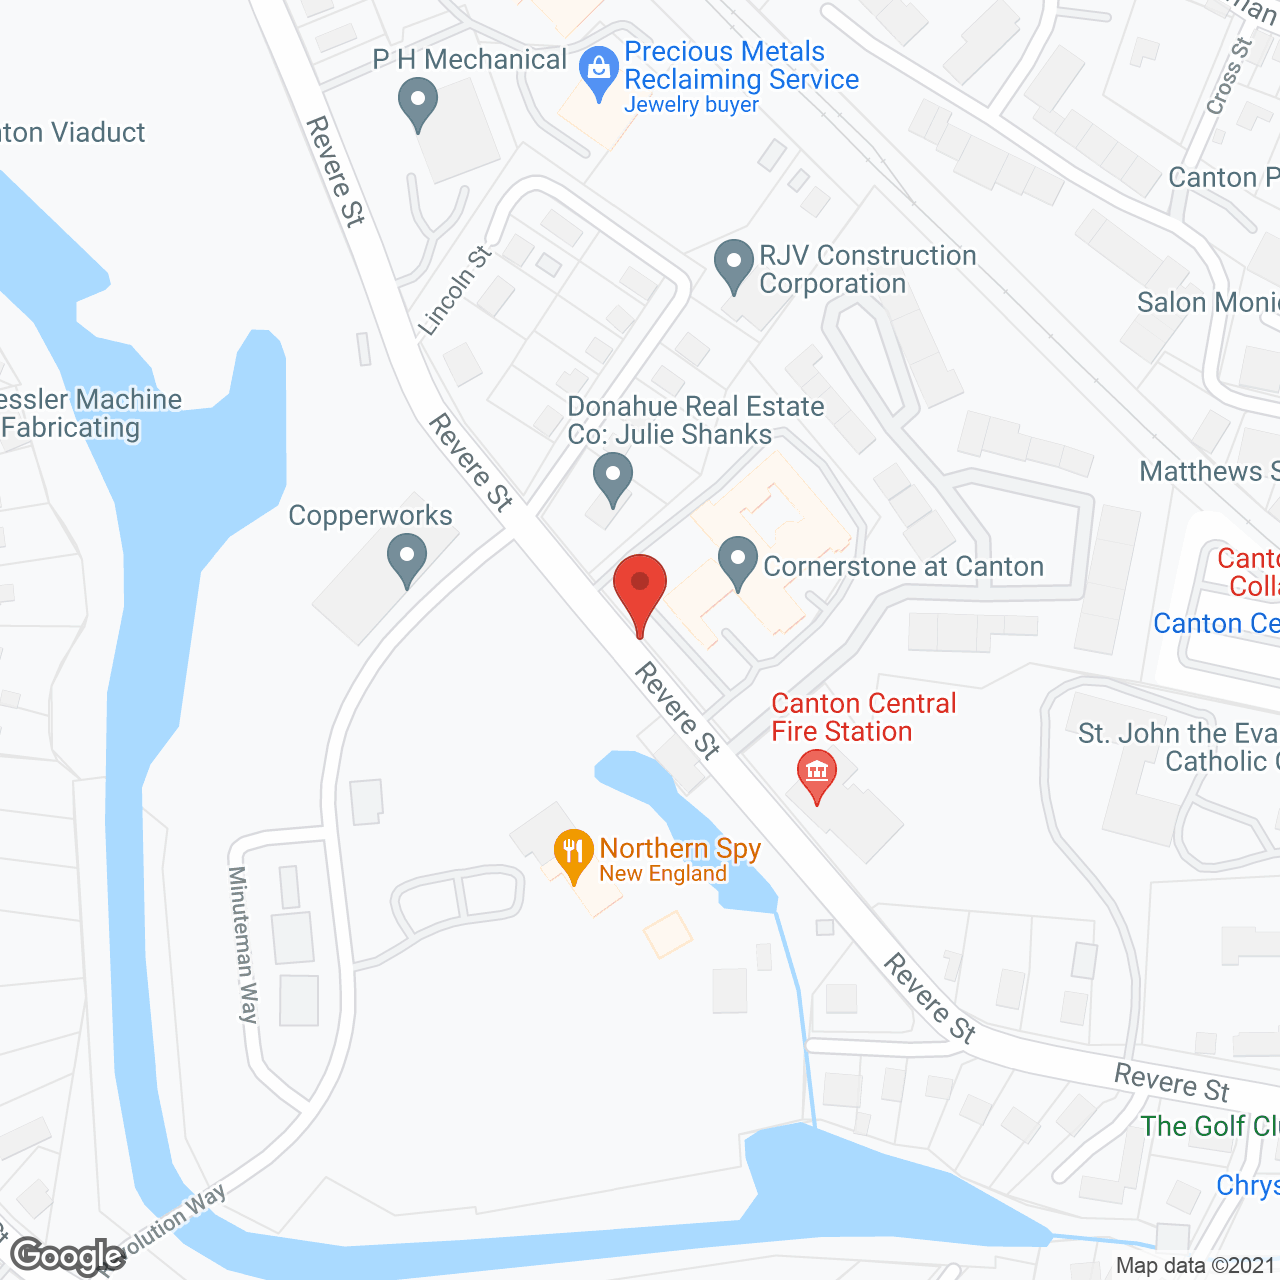 Cornerstone at Canton in google map